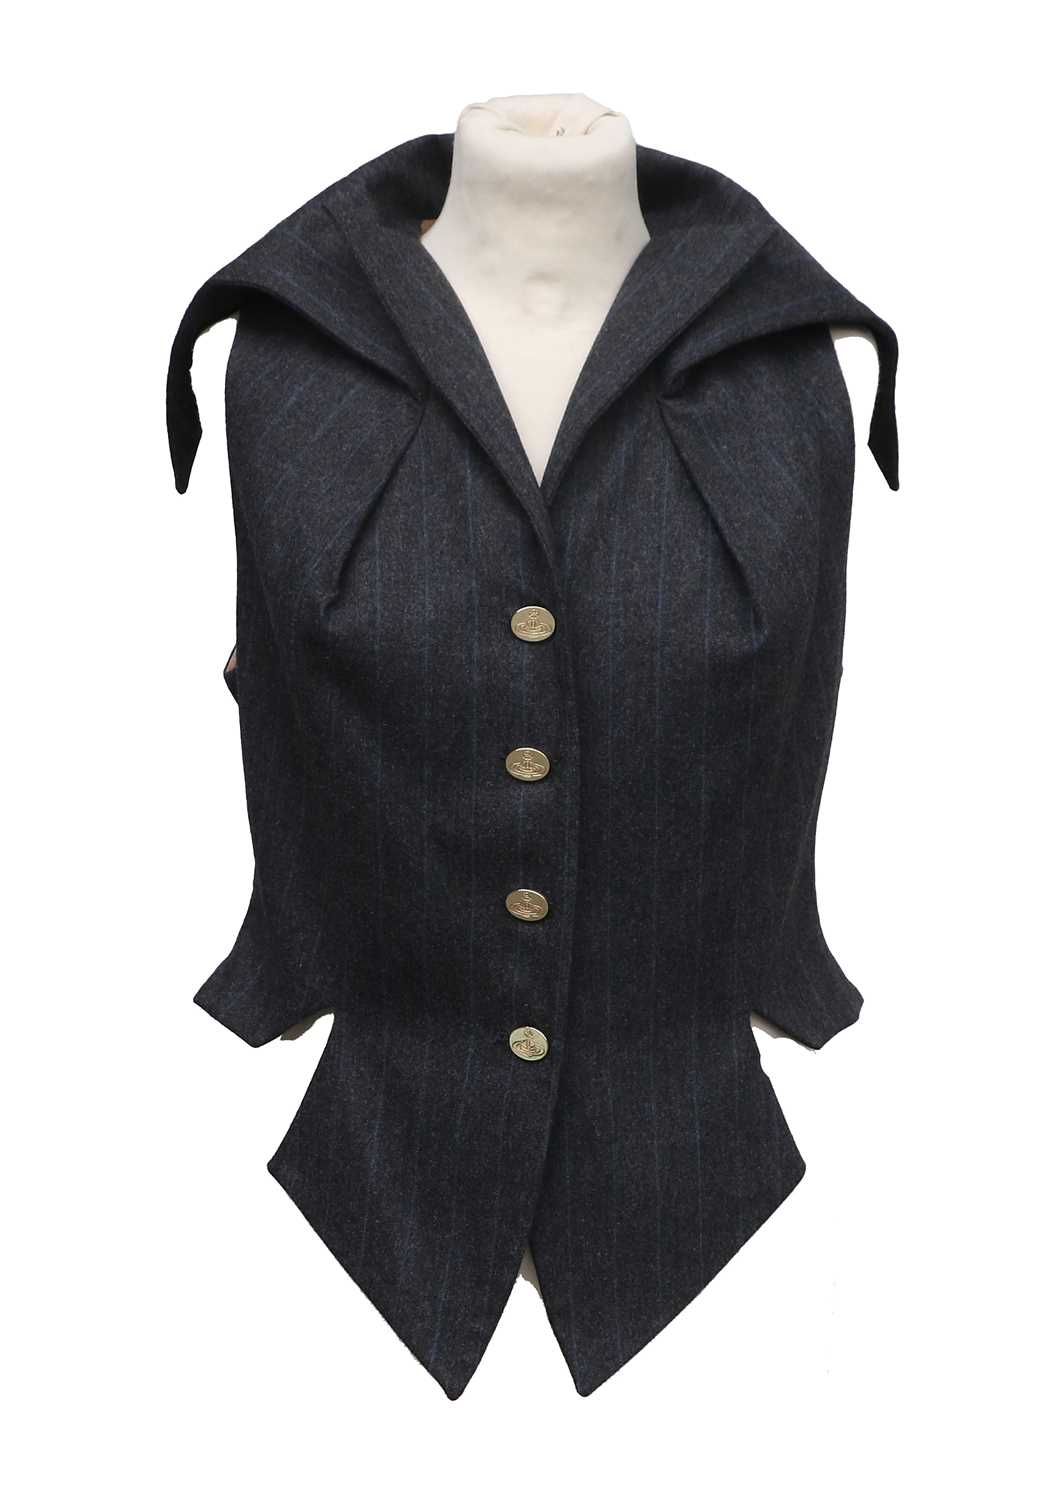 Vivienne Westwood Ingles Waistcoat, Spring/Summer Café Society Collection 1994, in grey and blue